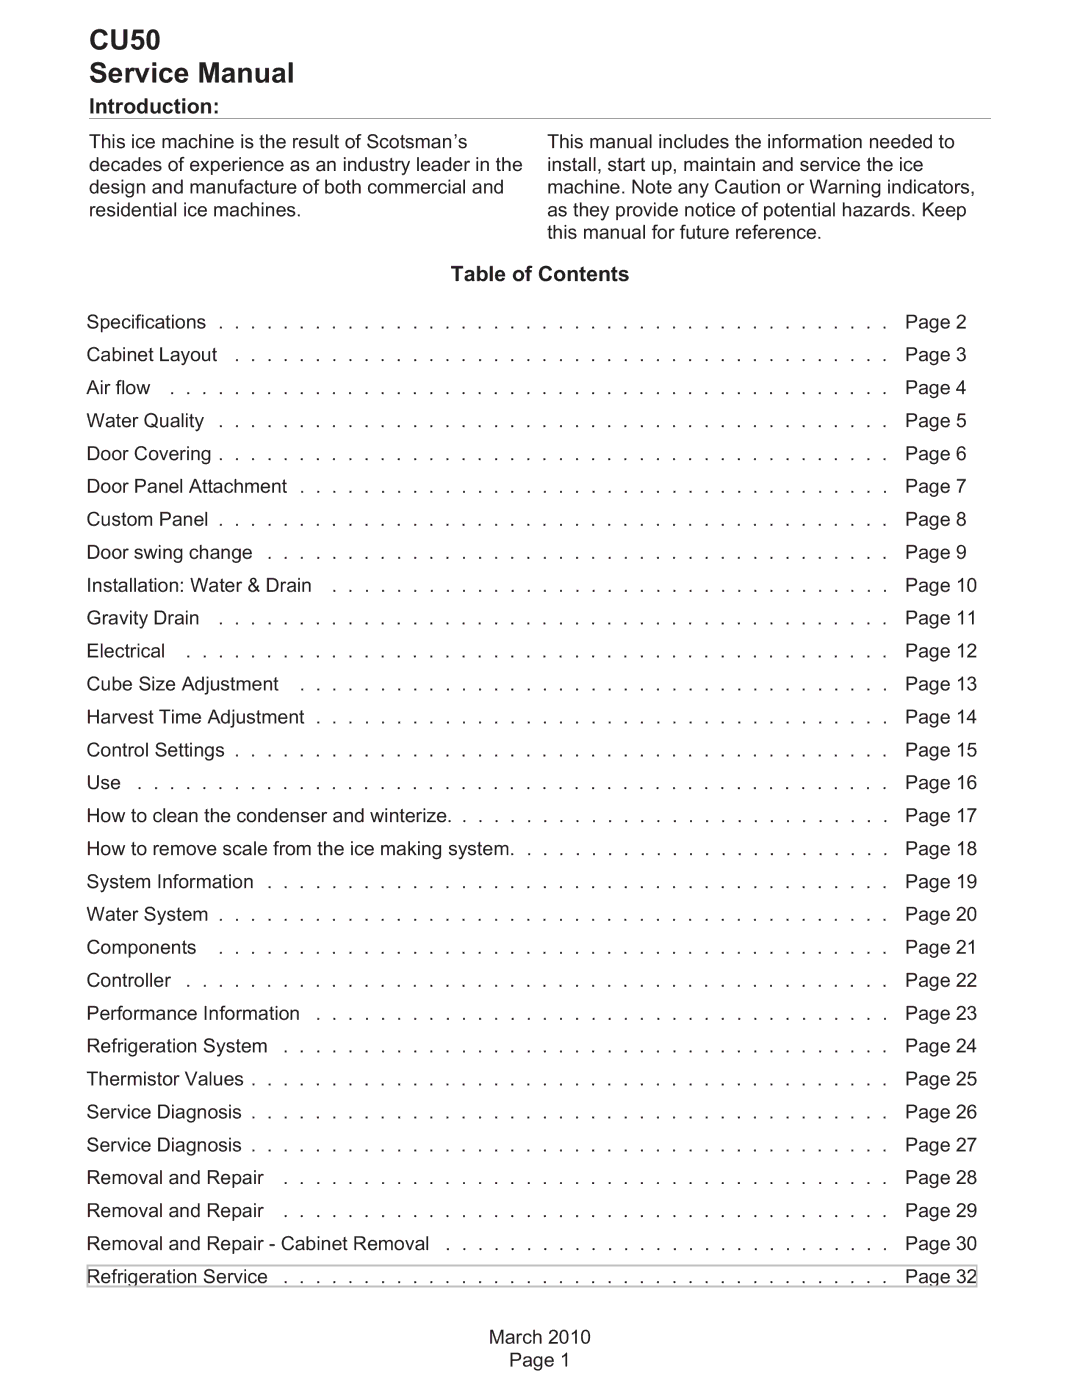 Scotsman Ice CU50 service manual Introduction, Table of Contents 